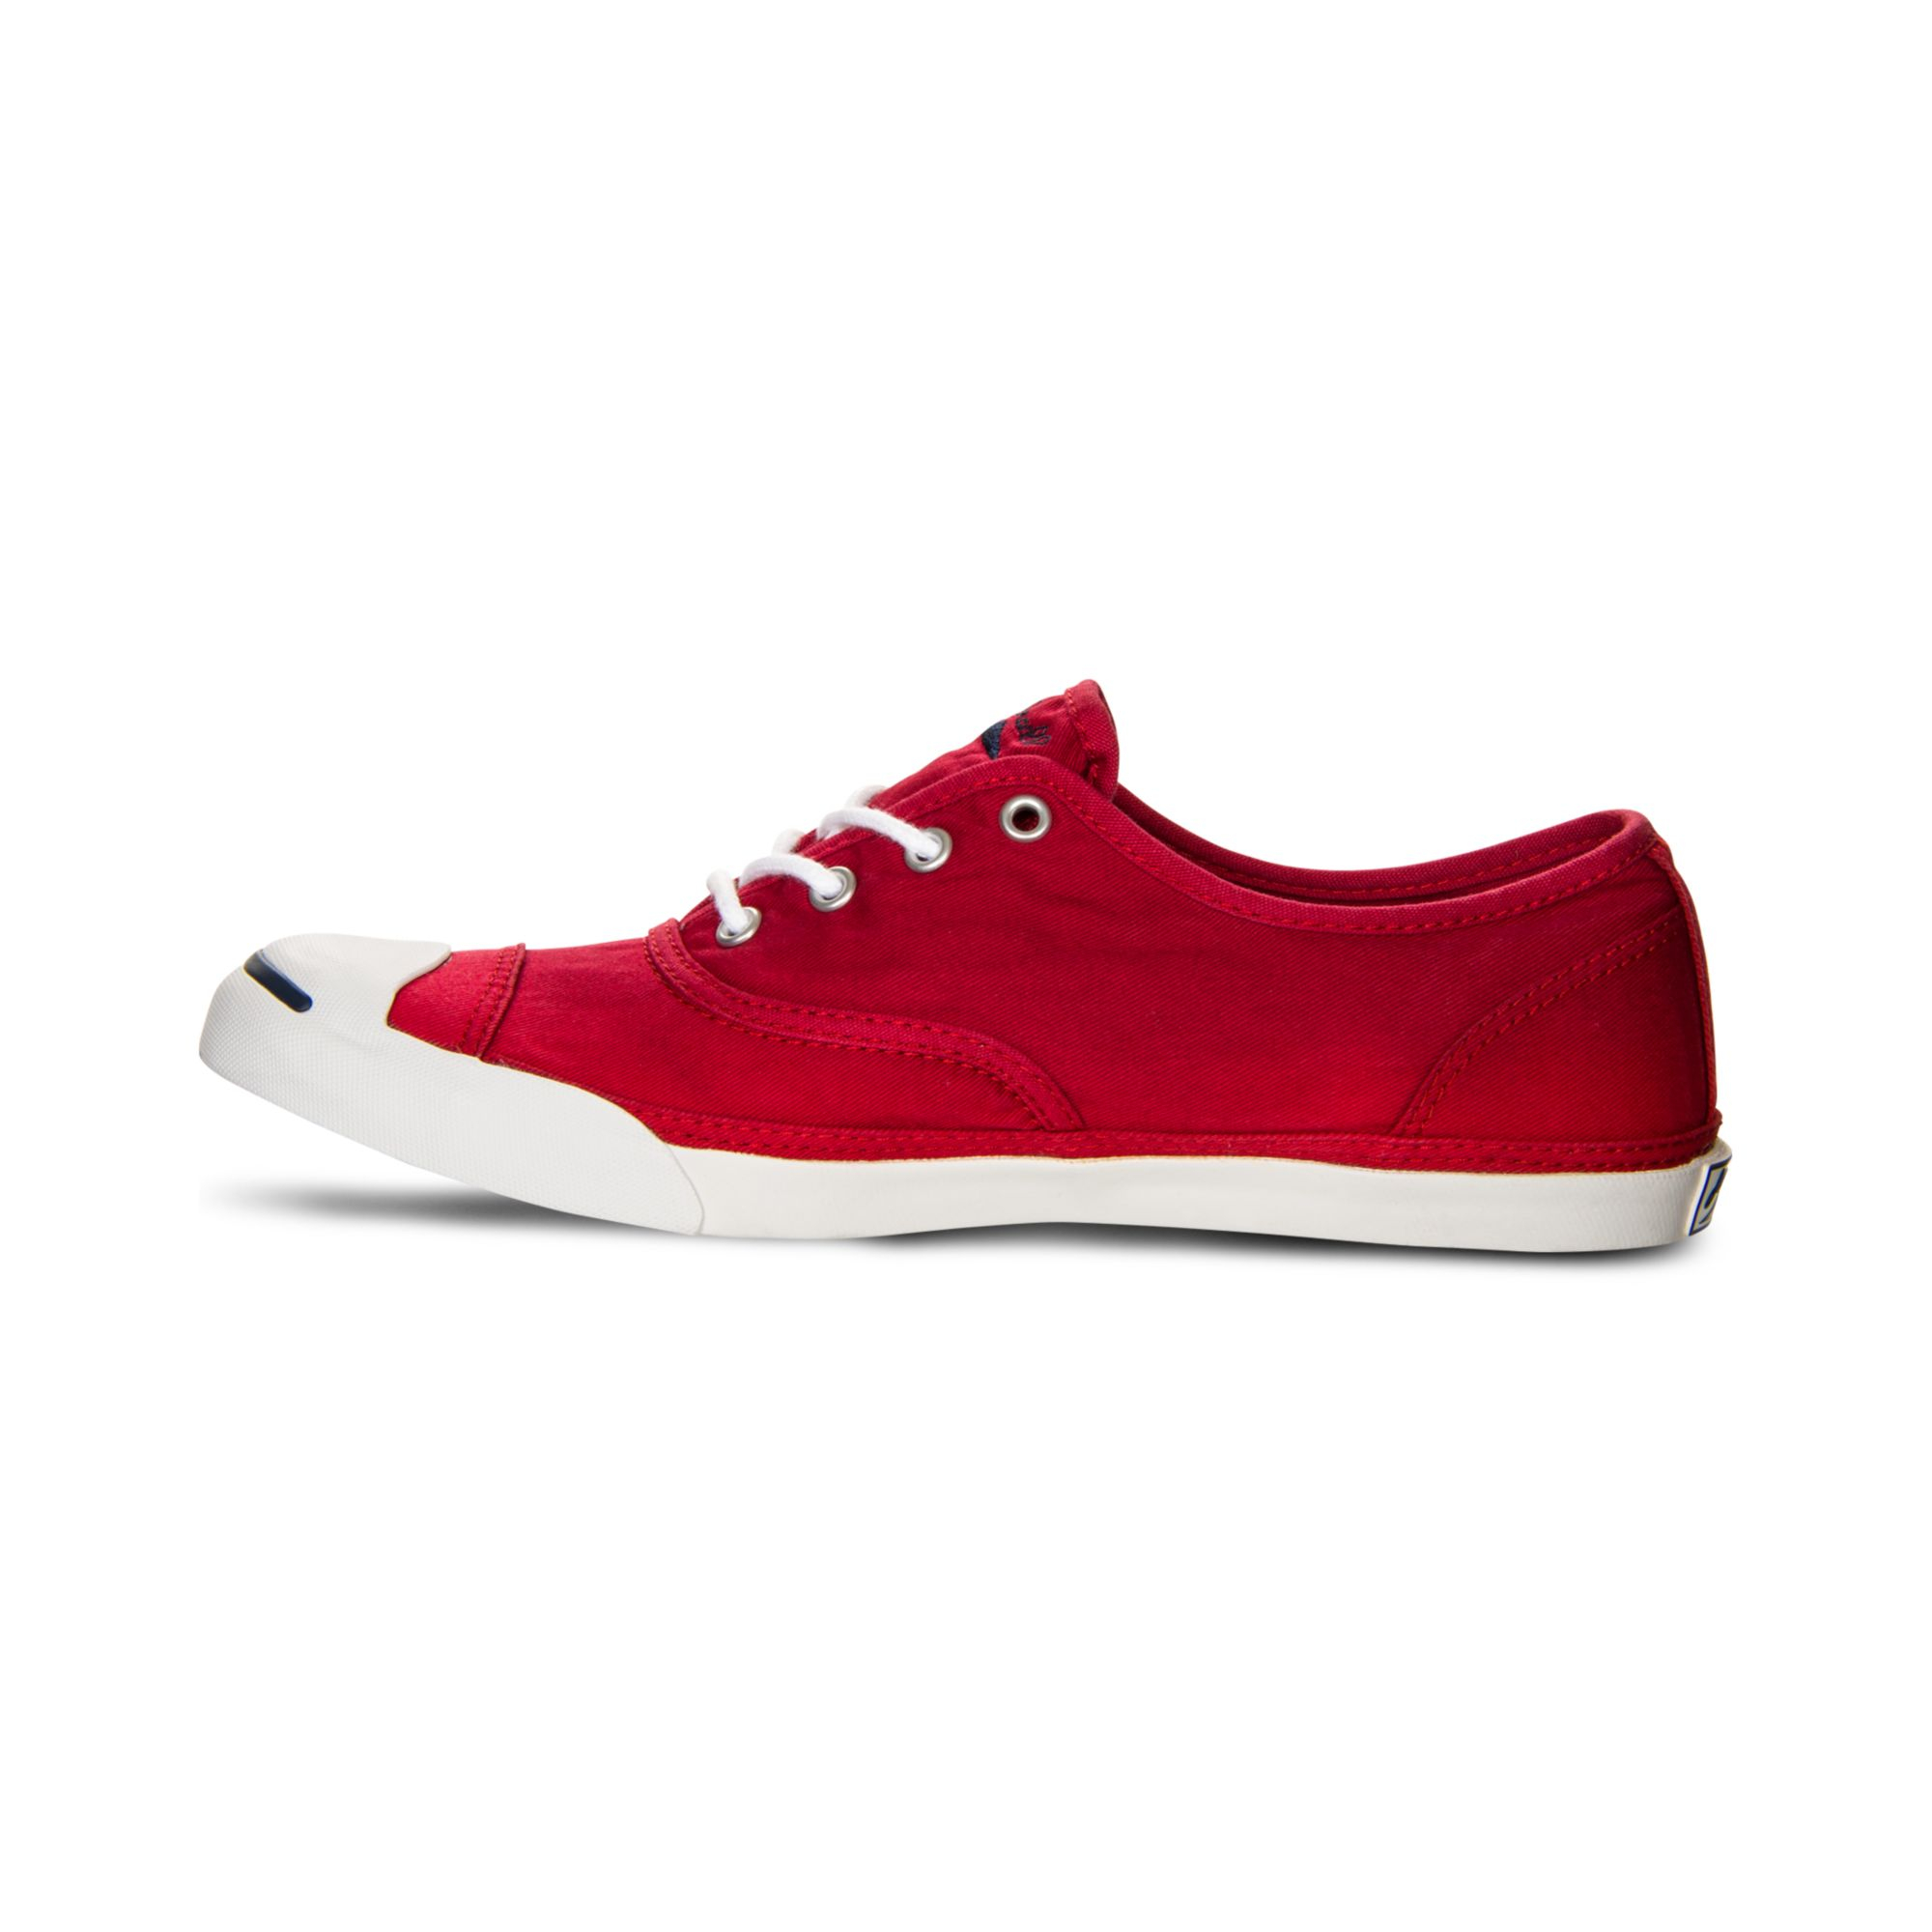 Lyst - Converse Jack Purcell Cvo Lp Sneakers in Red for Men